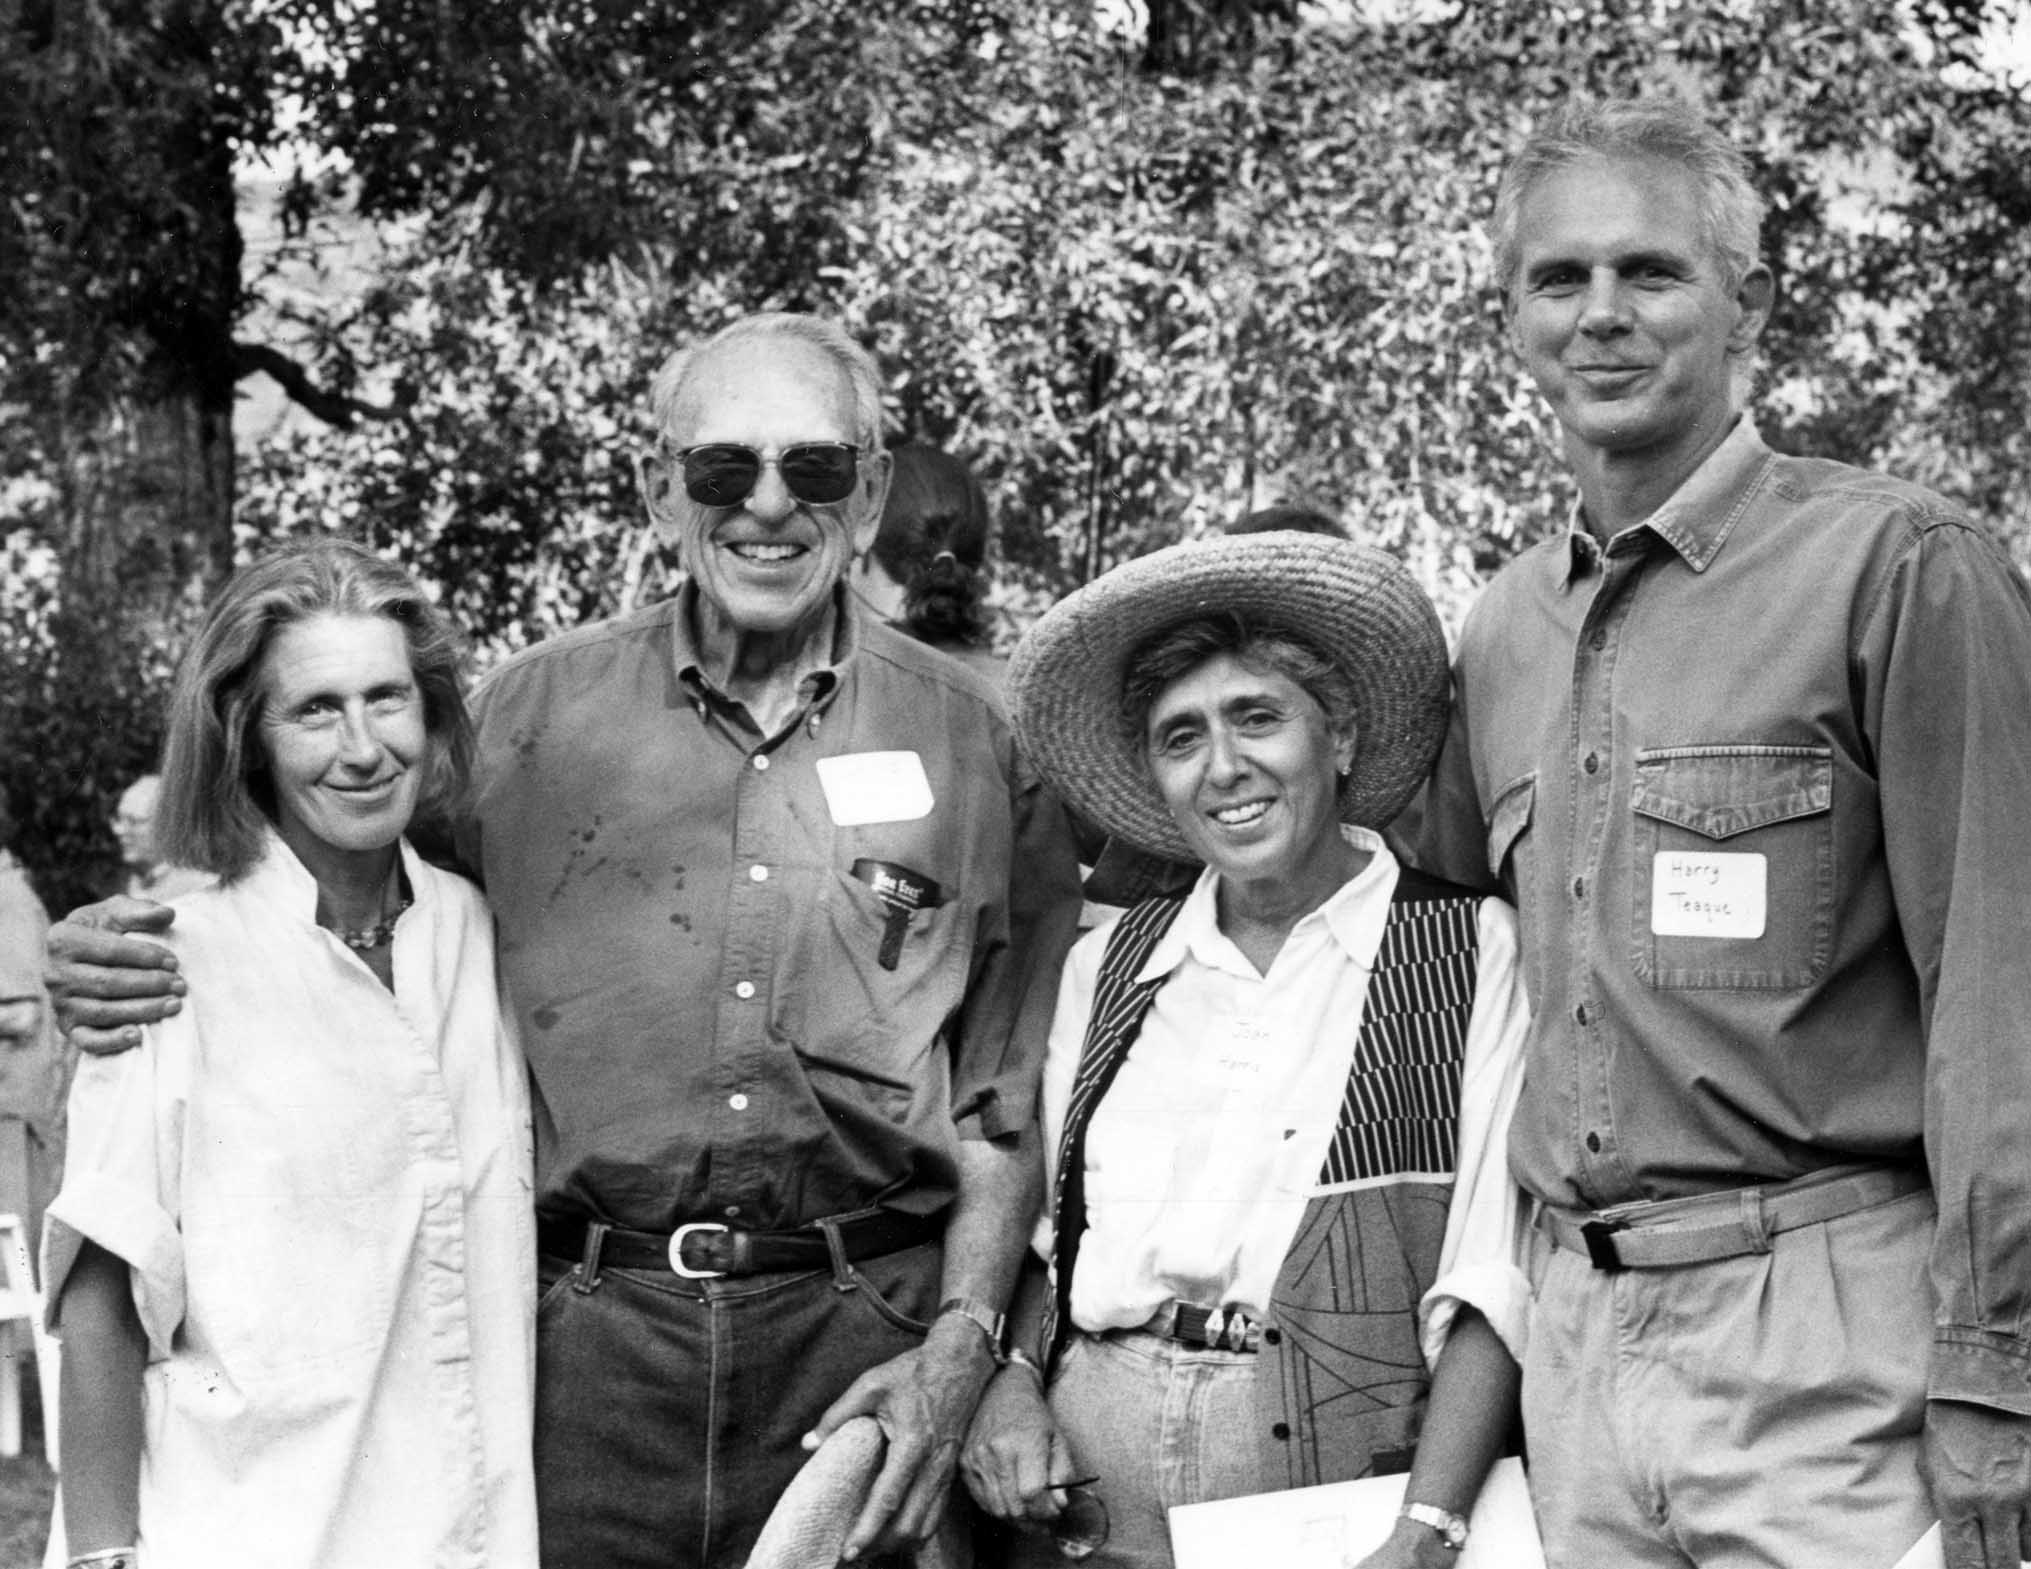 One b/w photograph of Annie Teague, Irving Harris, Joan Harris and Harry Teague at the groundbreaking ceremony for a new building at the Aspen Center for Physics, September 1995. This image appeared in Mary Eshbaugh Hayes' column "Around Aspen" on September 23-24, 1995 with the caption, "At the groundbreaking ceremony for the new Physics Center building are, left to right: Annie Teague; Irving and Joan Harris, who provided funding for the new concert hall for the Aspen Music Festival; and Harry Teague, who is architect for both Harris Hall and the new Physics building." Photo courtesy of Aspen Historical Society.